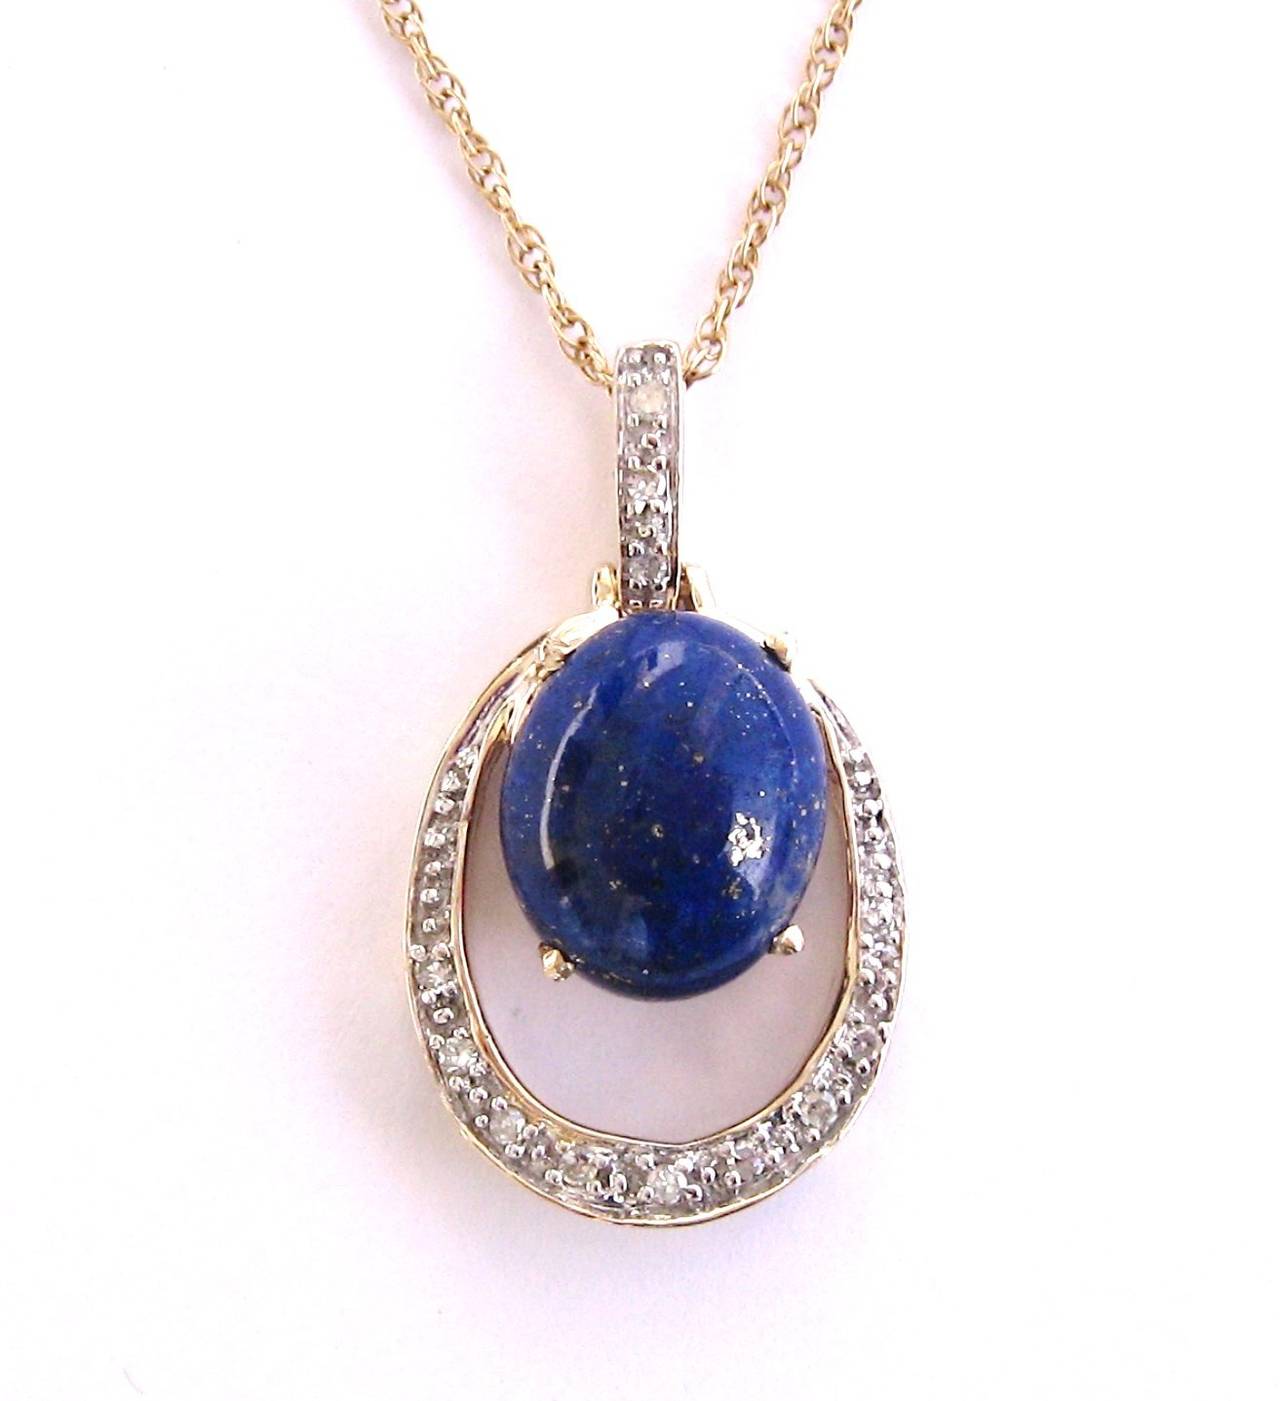 Stunning Lapis and Diamond Pendant 
Set in 10K Gold w/ 14K gold Petite chain 
Chain measures 18